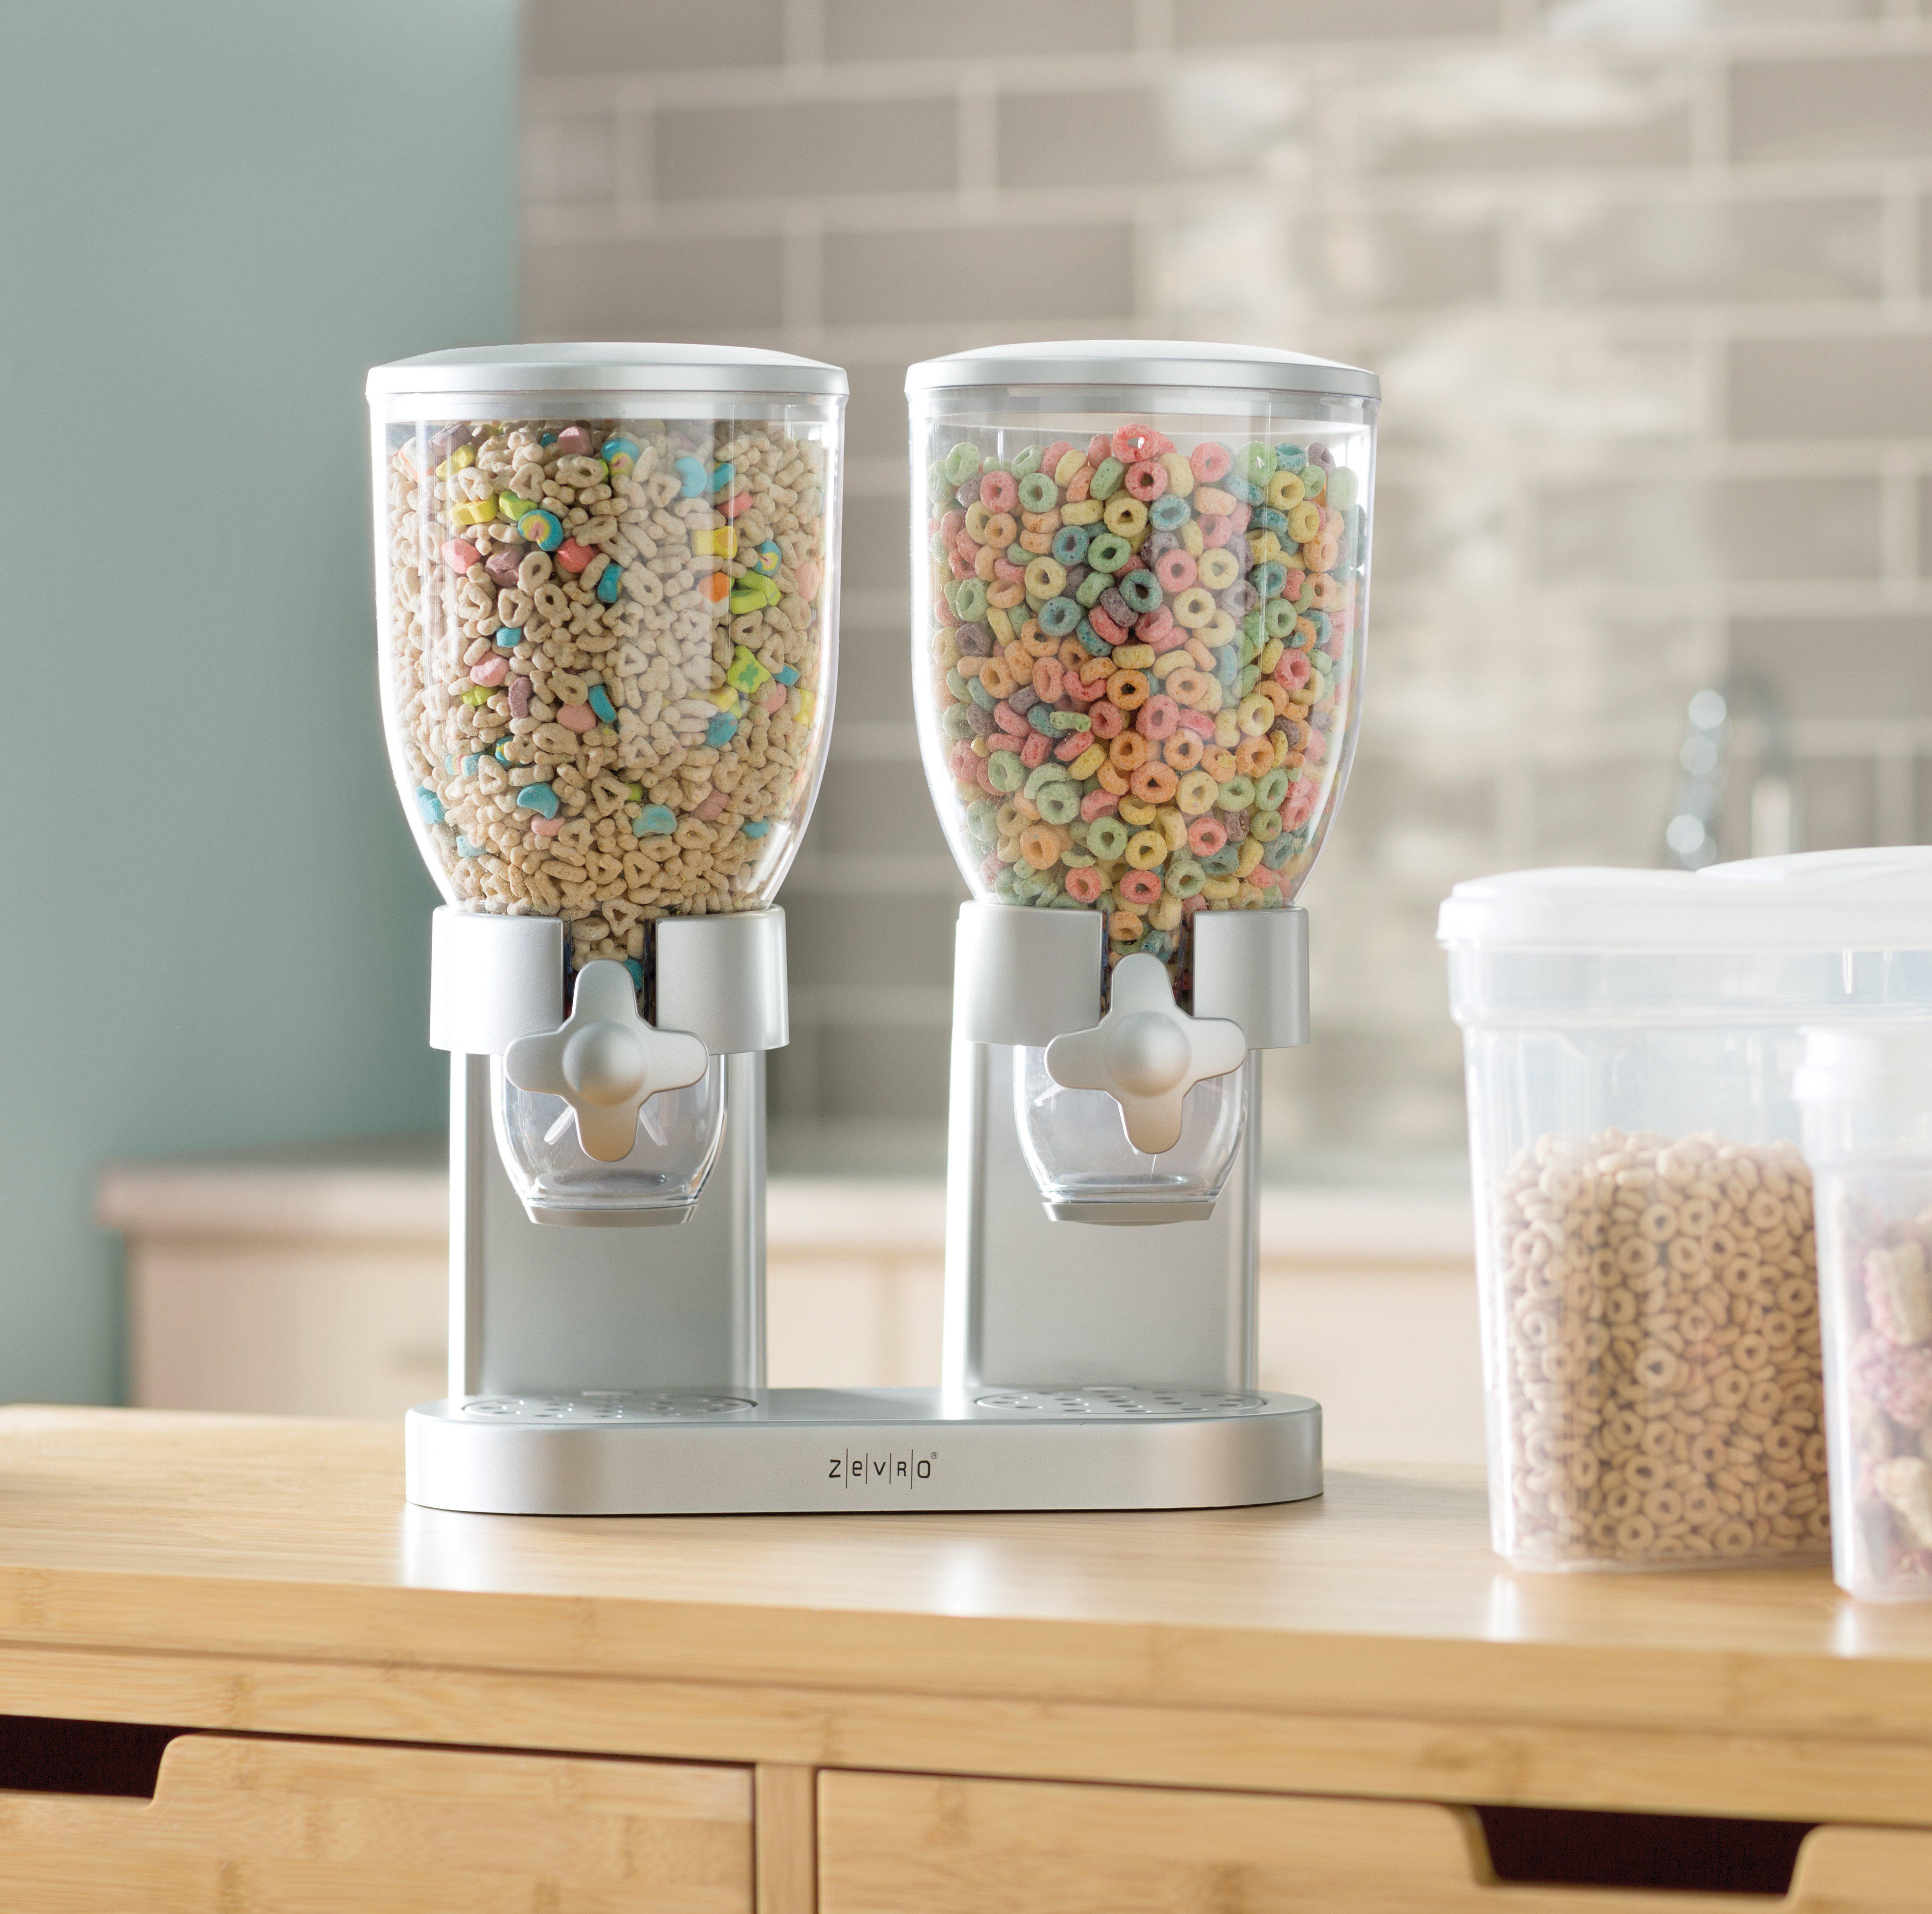 DOUBLE CEREAL DISPENSER DRY FOOD STORAGE CONTAINER DISPENSER MACHINE 